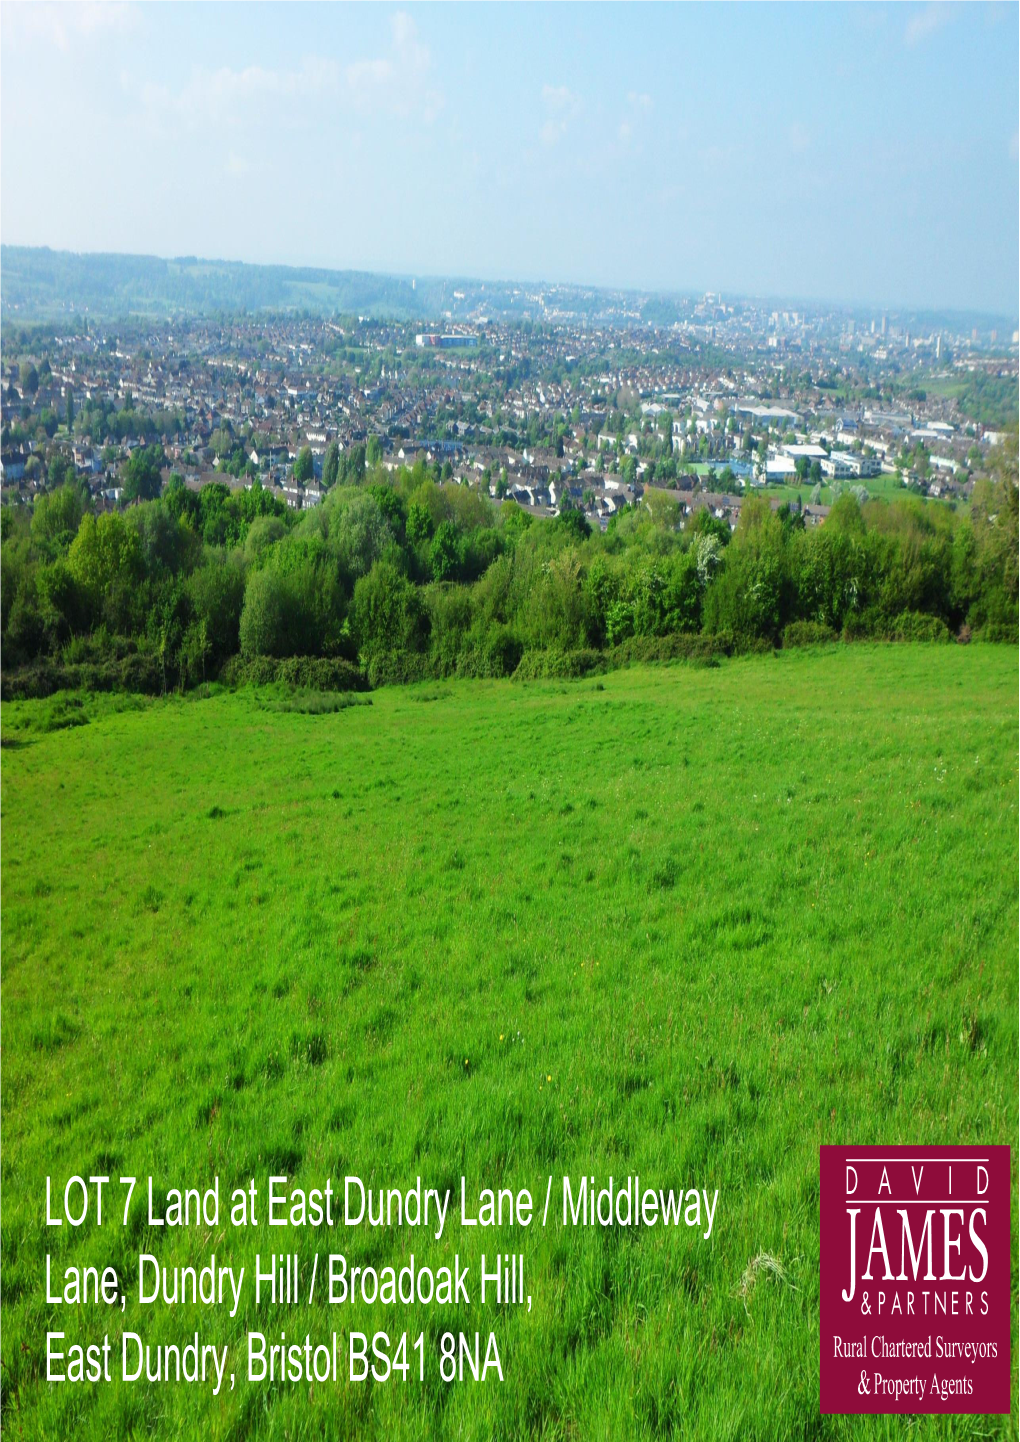 LOT 7 Land at East Dundry Lane / Middleway Lane, Dundry Hill / Broadoak Hill, East Dundry, Bristol BS41 8NA